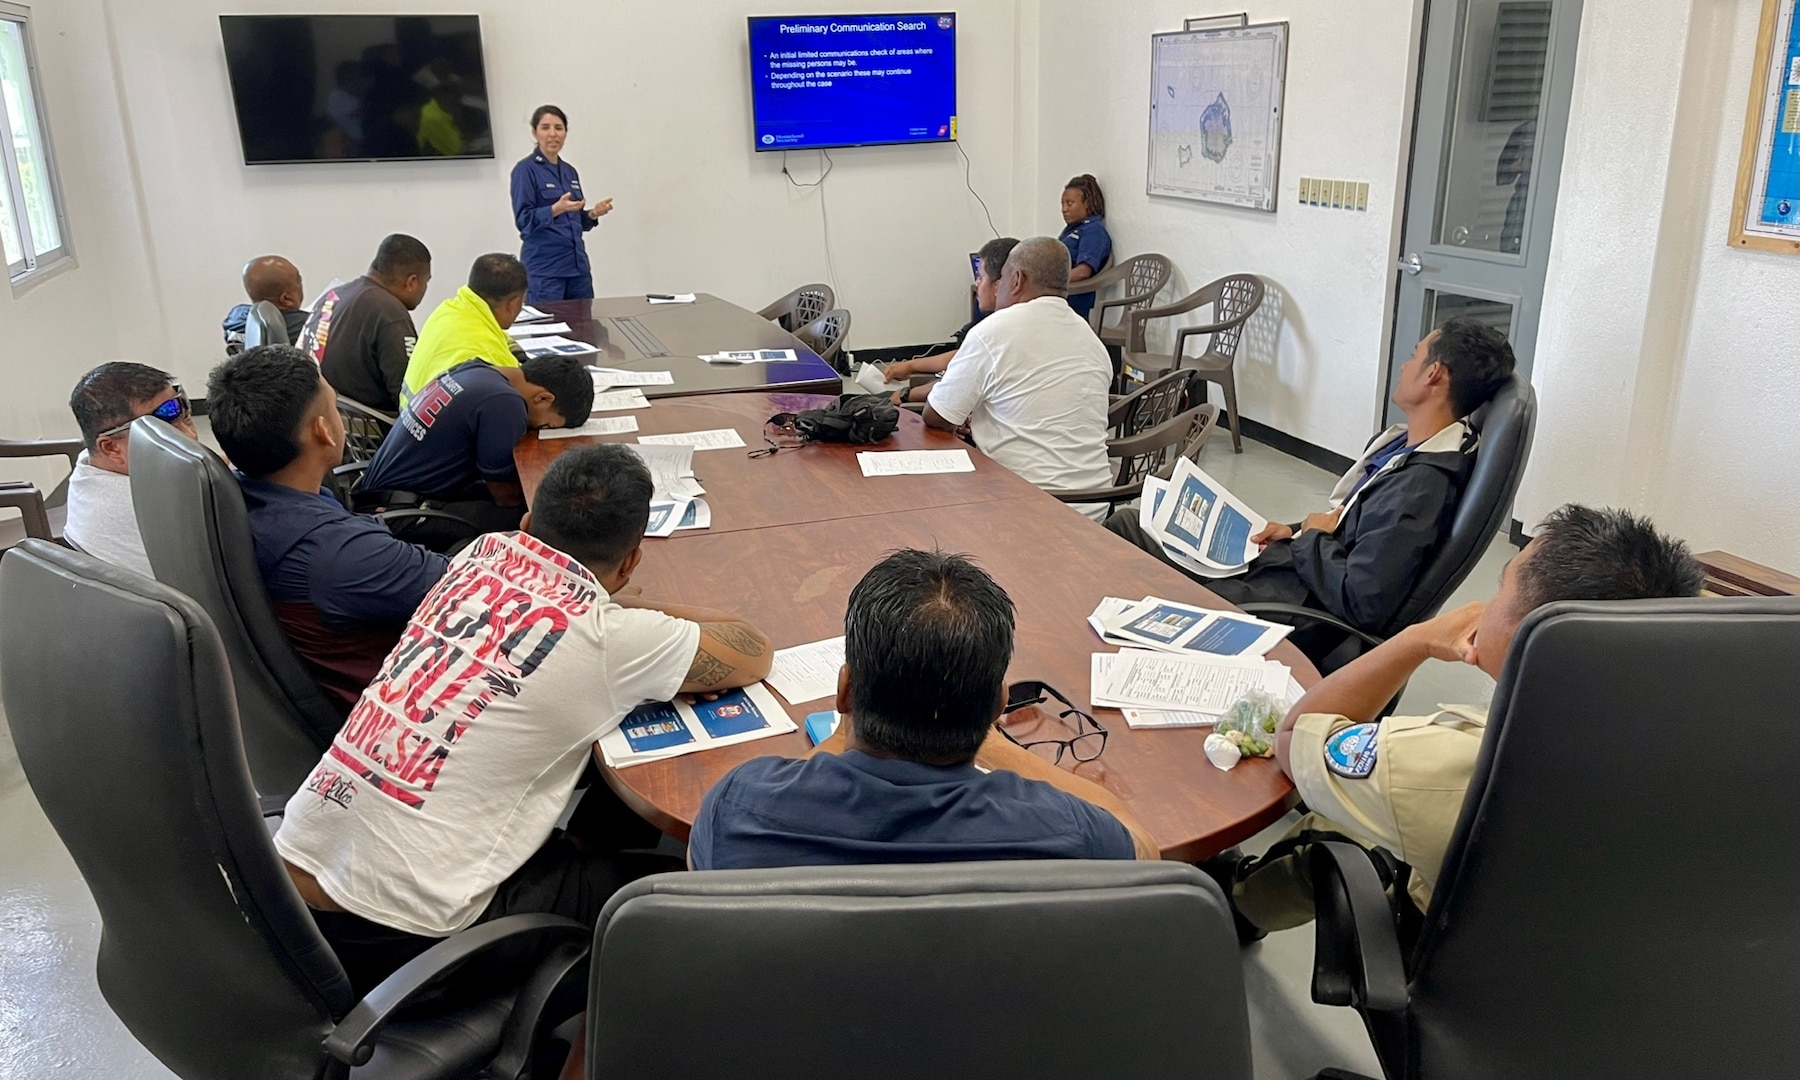 Members of U.S. Coast Guard Forces Micronesia/Sector Guam provide instruction in search and rescue planning and operations during a SAR exercise with partners in the Pohnpei State, Federated States of Micronesia, on April 18, 2024. The exercise involved comprehensive seminars and functional drills designed to strengthen SAR response across the region. Key components of the training included SAR system fundamentals, alerting procedures, communications, and a SAR OPS software demonstration, alongside an overdue vessel check sheet exercise. Participants included the Pohnpei State Division of Fire and Emergency Services and Pohnpei Division of Fish and Wildlife. (U.S. Coast Guard photo by Lt. Henry Dunphy)